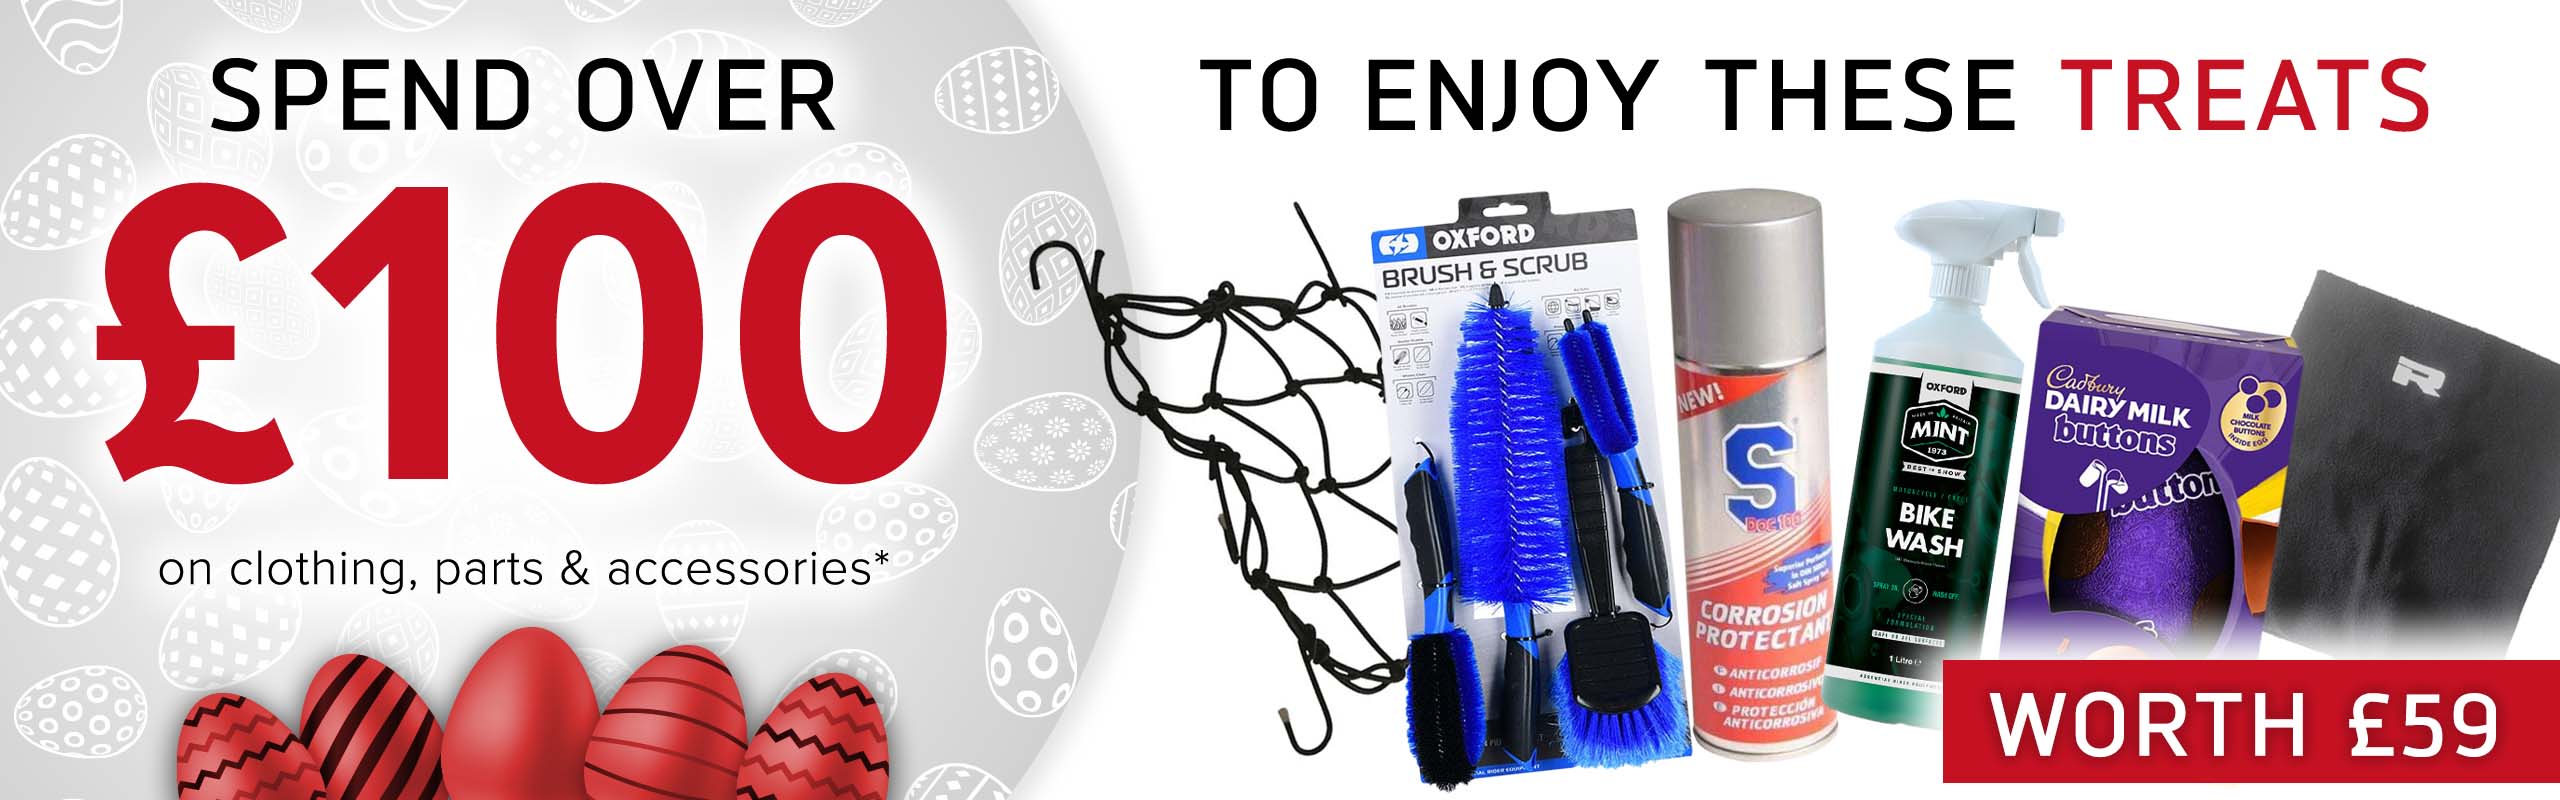 SPEND OVER £100 on clothing, parts and accessories and get THESE (An Easter egg, S Doc 100 Corrosion Protectant, and Mint Bike Wash (1l), a Richa Fleece Neck Warmer, a Luggage Cargo Net and an Oxford Brush & Scrub Set) for FREE! (Products worth £59)